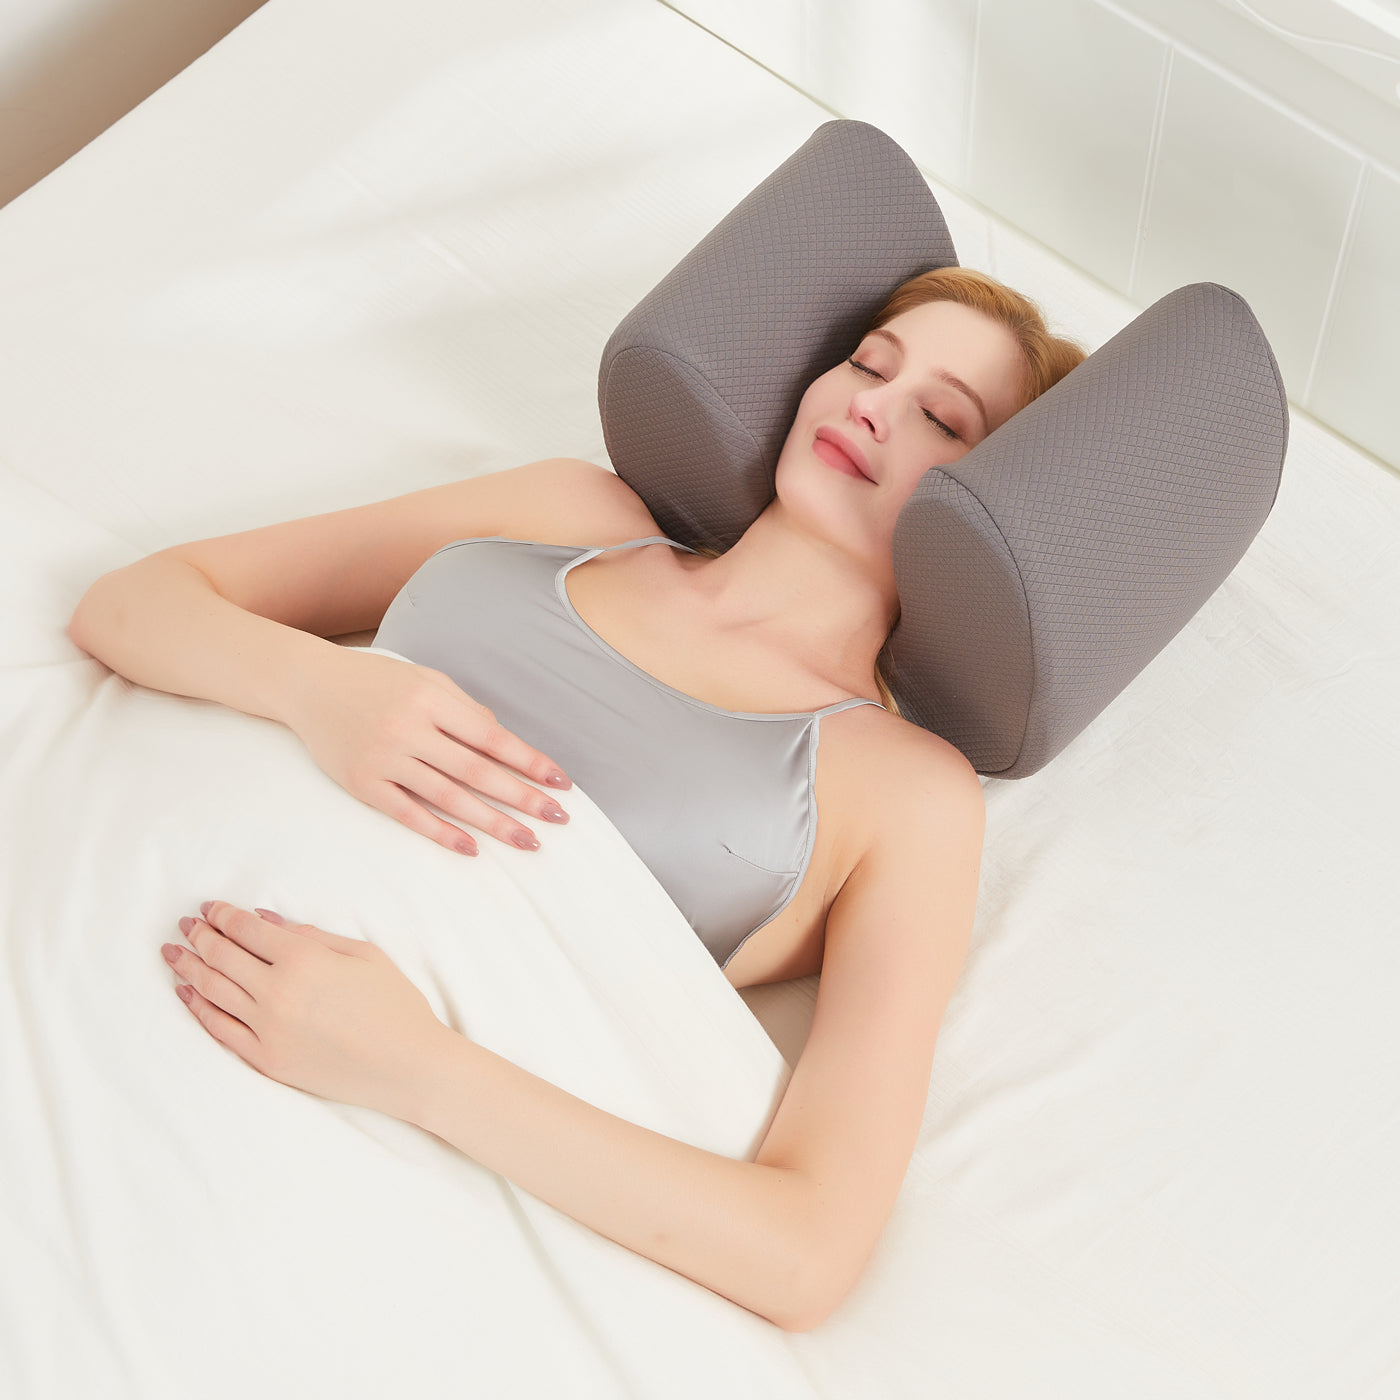 young woman sleeping comfortably in her soli pillow with headphones